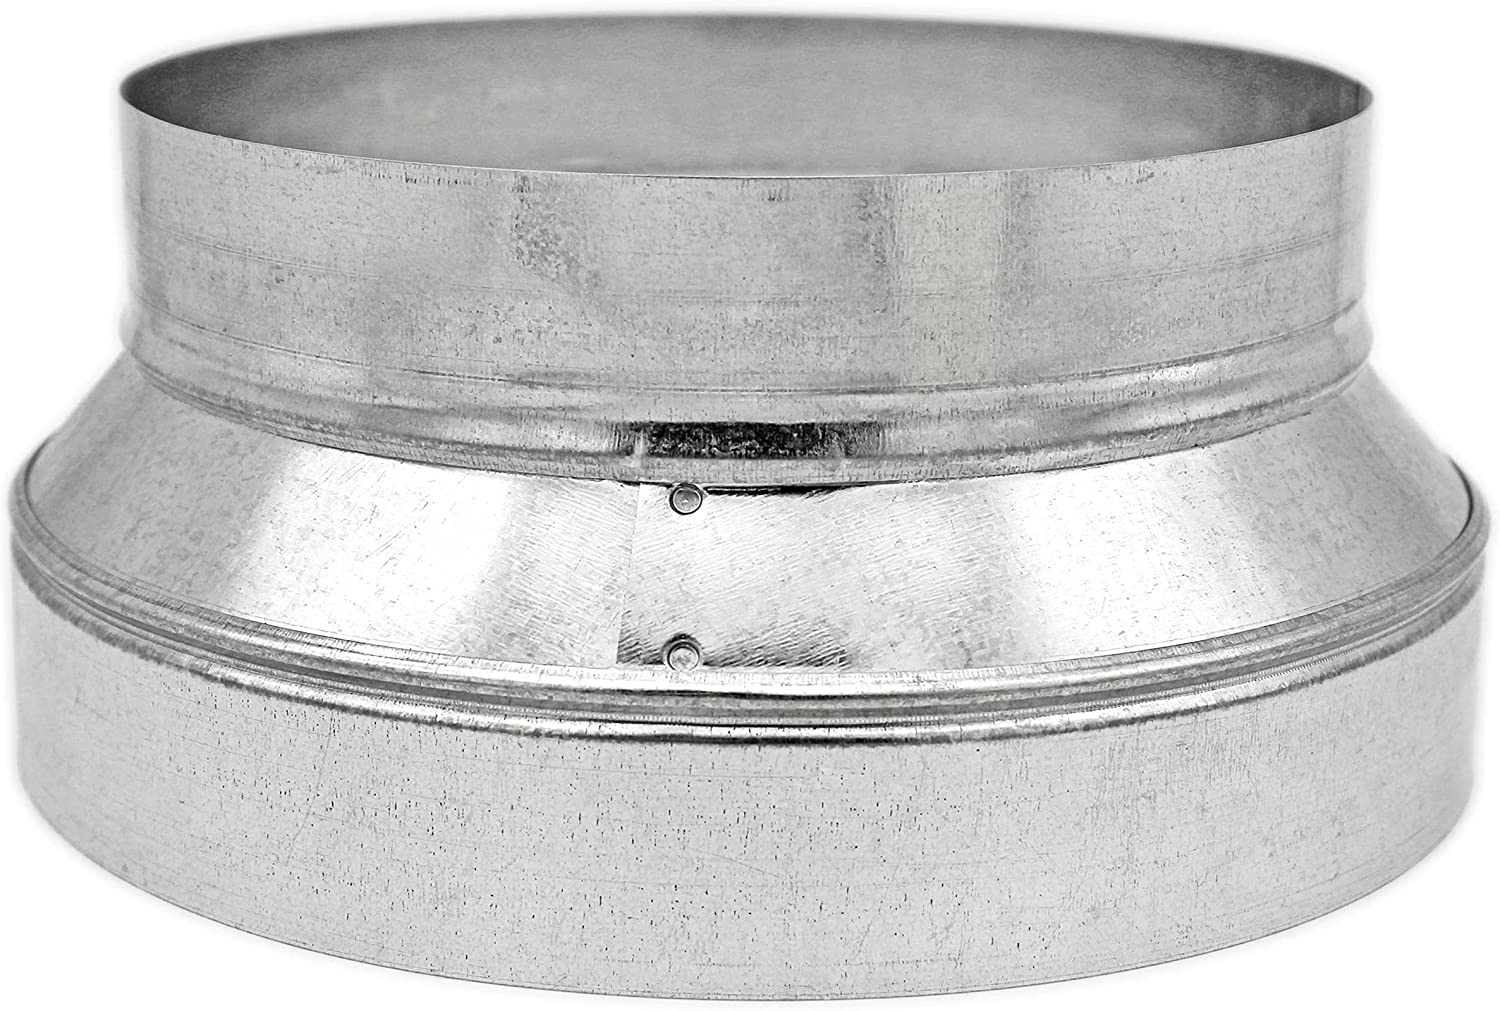 HVAC Premium Round Metal Pipe Reducer & Increaser | 12" to 8" HVAC Duct Reducer or Increaser 26g Gauge | Galvanized Sheet Metal Ducting Connector is Compatible with Duct 8"